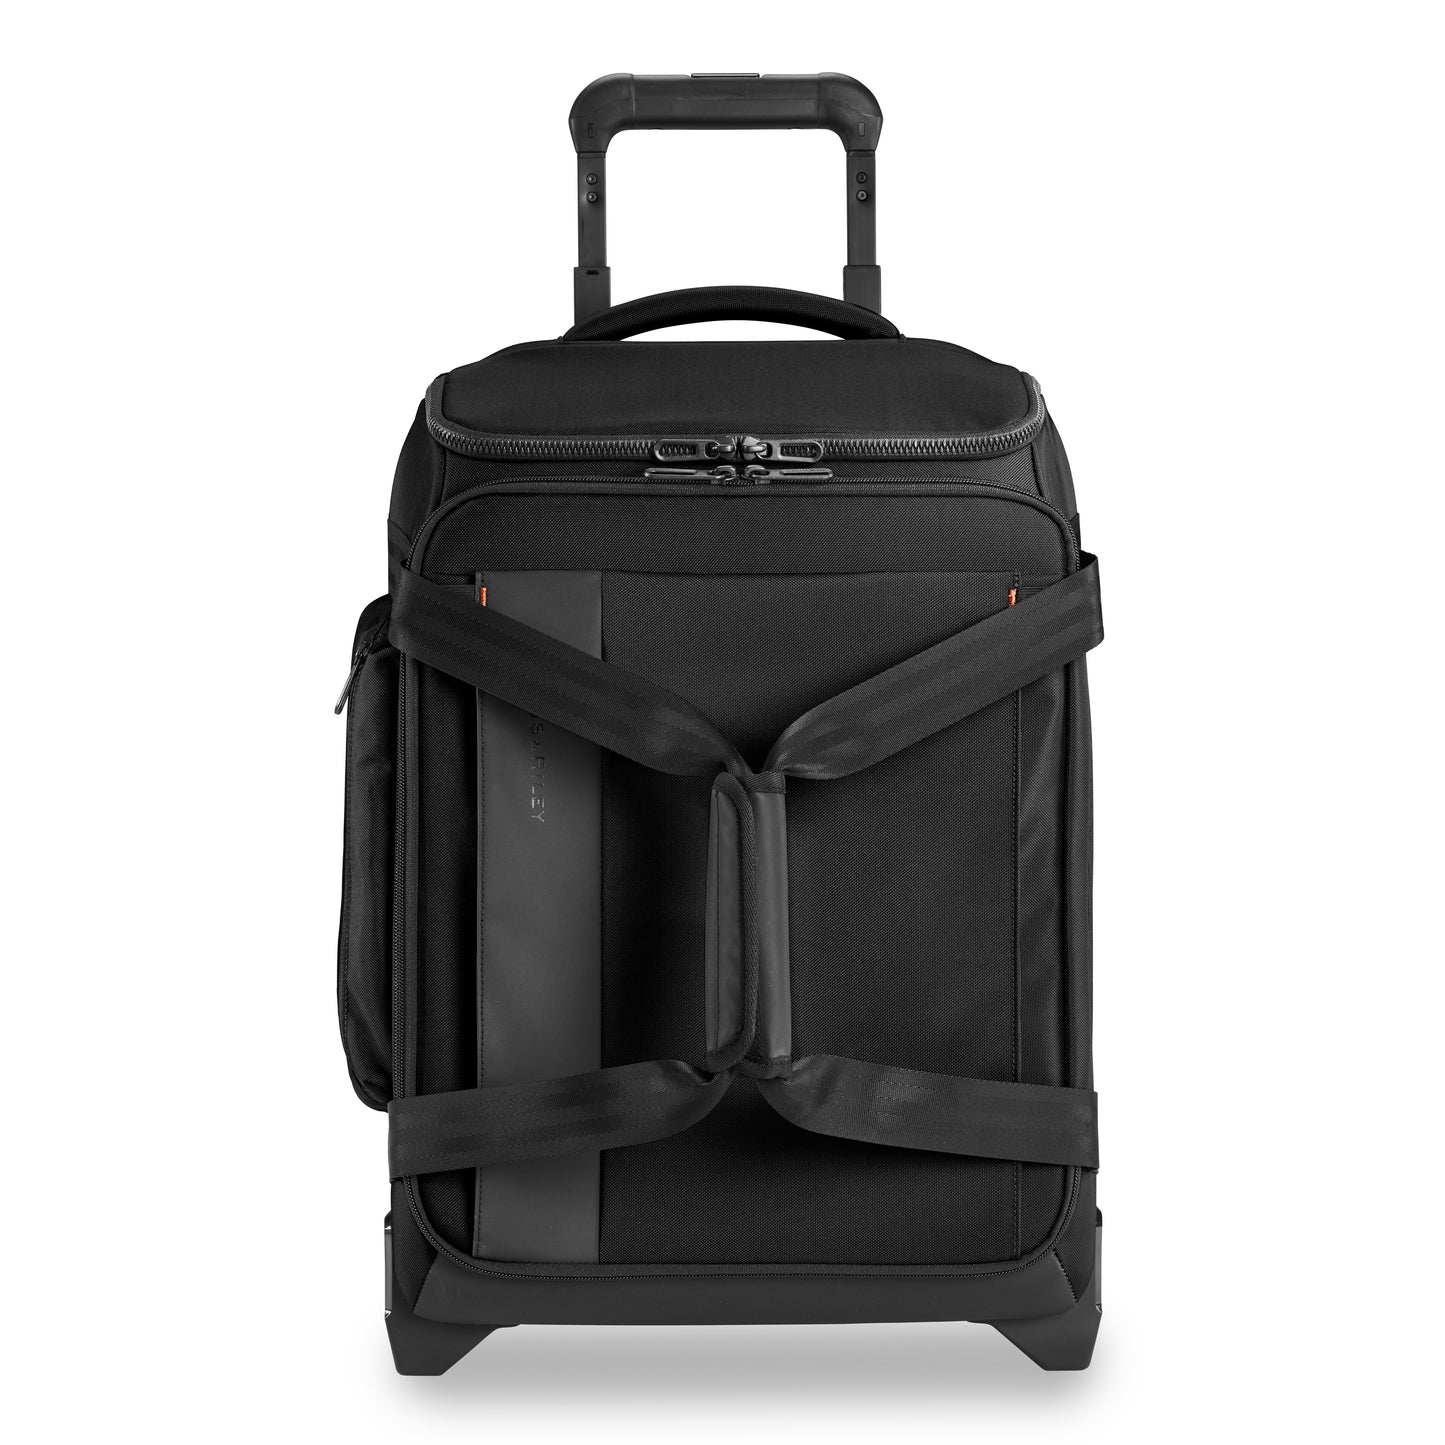 Briggs & Riley ZDX 21" Carry-On 2 Wheel Duffle